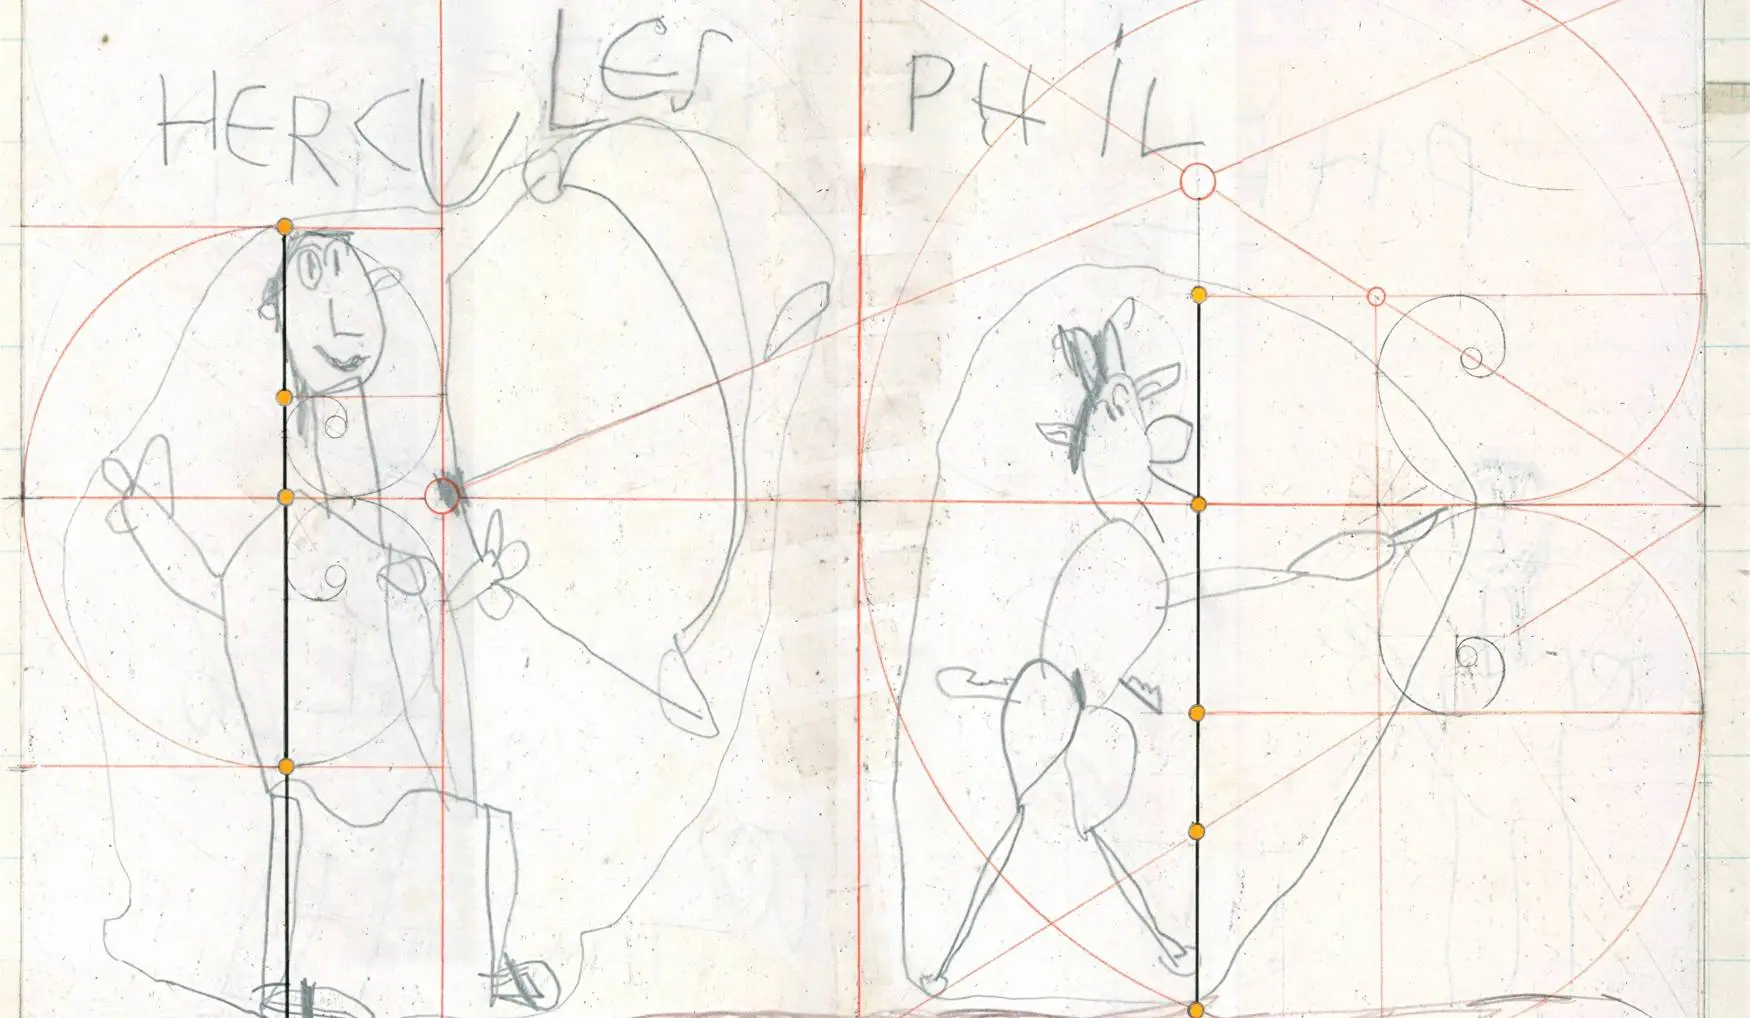 a pencil drawing of two figures labeled "Hercules" and "Phil"